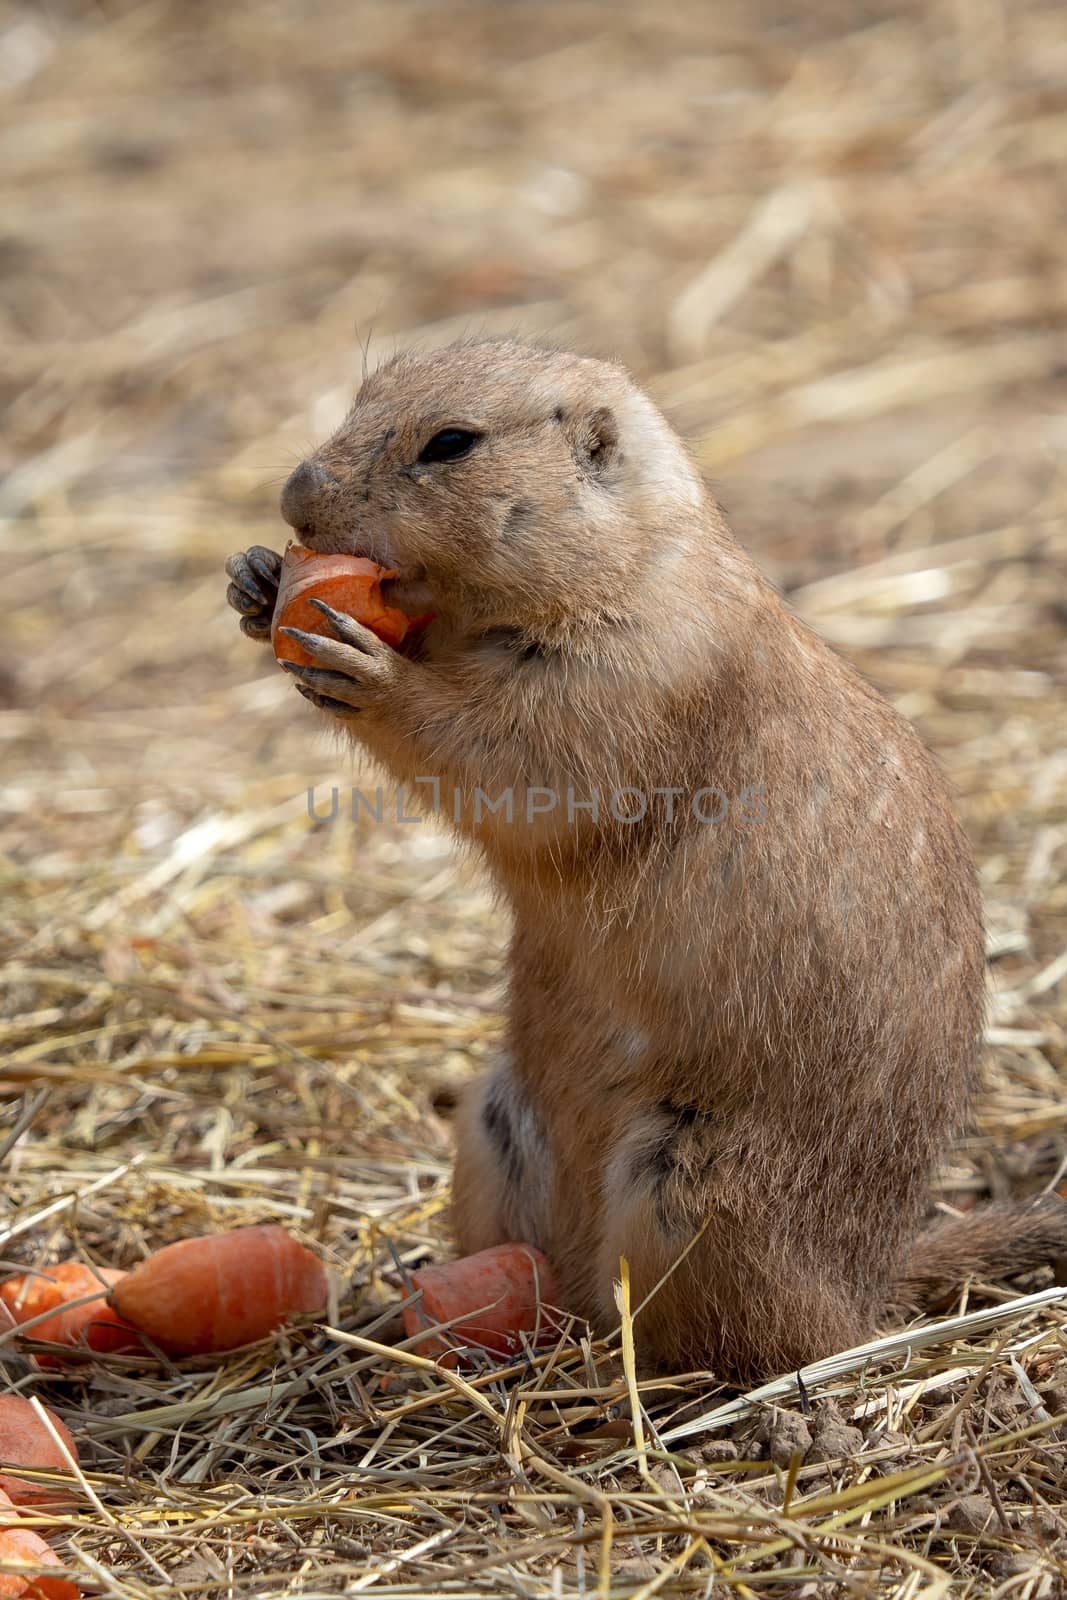 A prairie dog (Cynomys ludovicianus) is eating a carrot